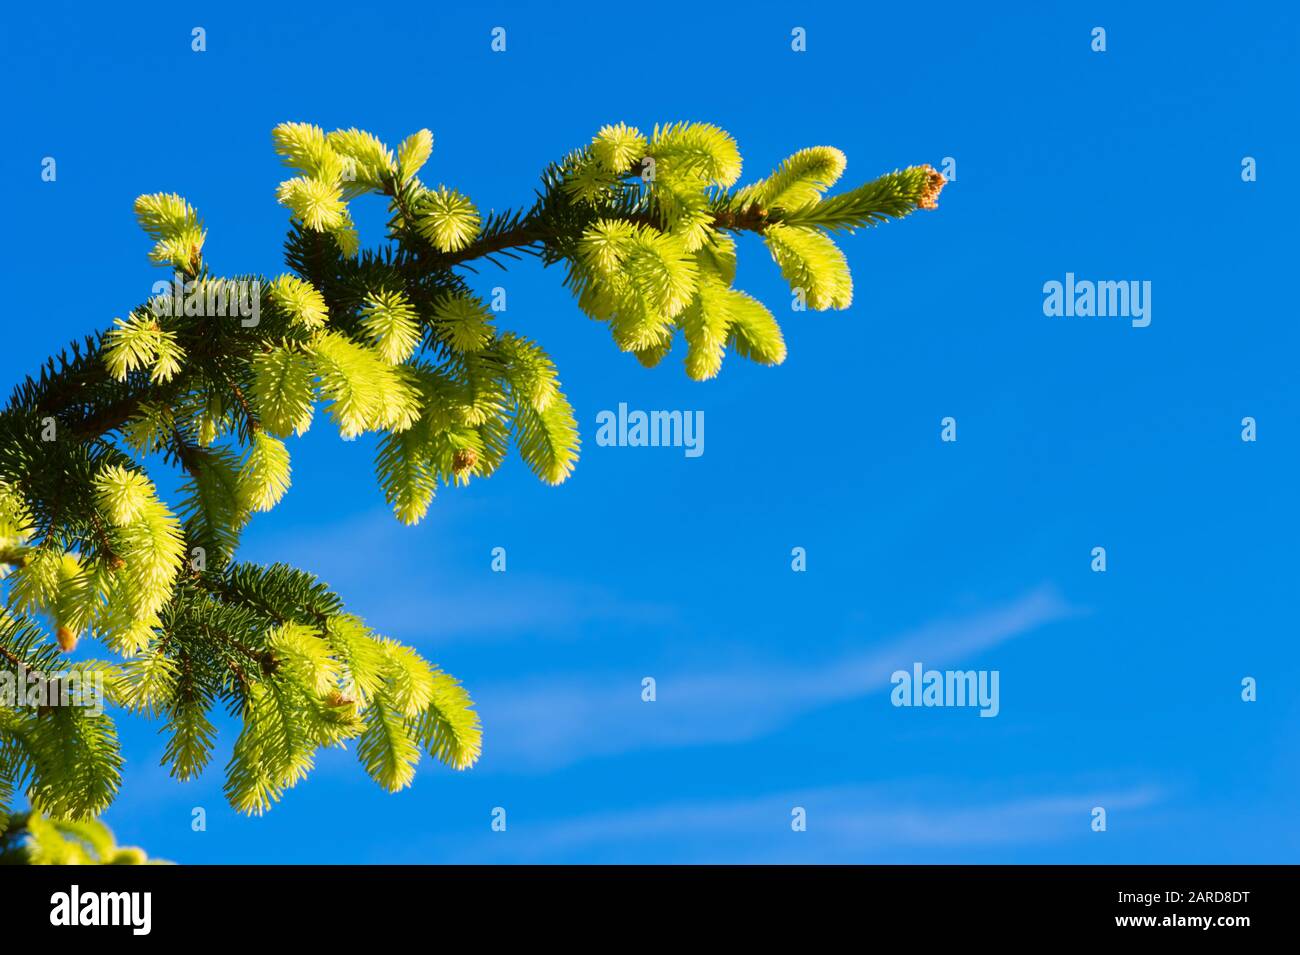 Spruce (Picea abies f. aurea) branches and new growth against blue sky. Selective focus. Stock Photo